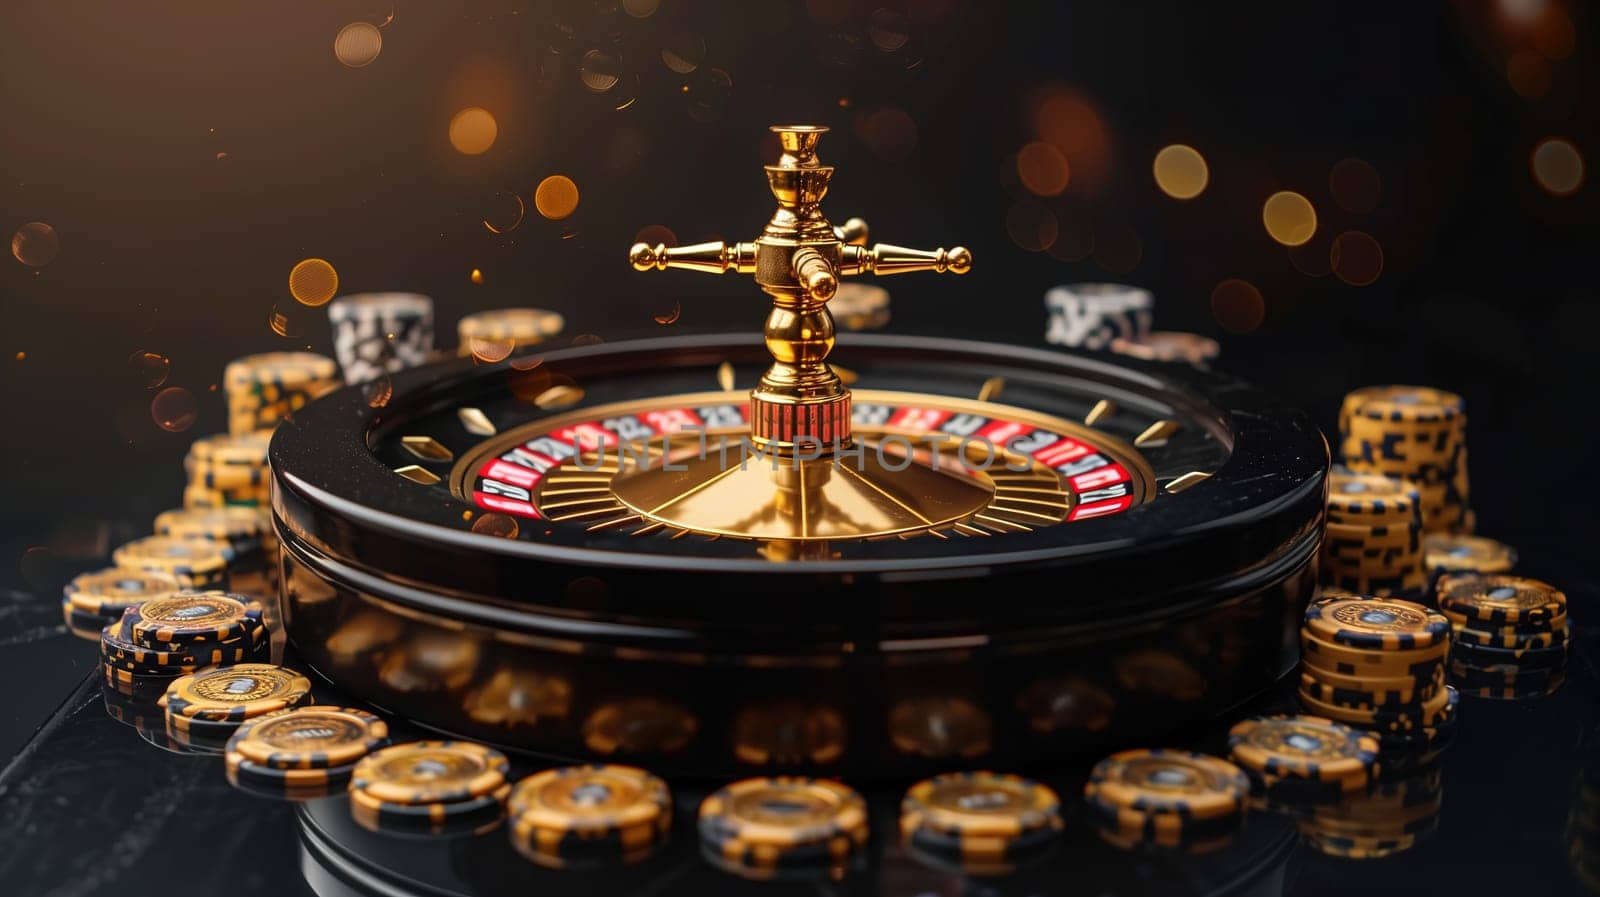 A close-up view captures the luxurious detail of a gleaming casino roulette wheel, amidst a sea of sparkling golden chips that signify wealth and the thrill of gambling. The scene is set against a dark, bokeh-lit backdrop, highlighting the anticipation that fills the atmosphere in a high-stakes gaming setting.